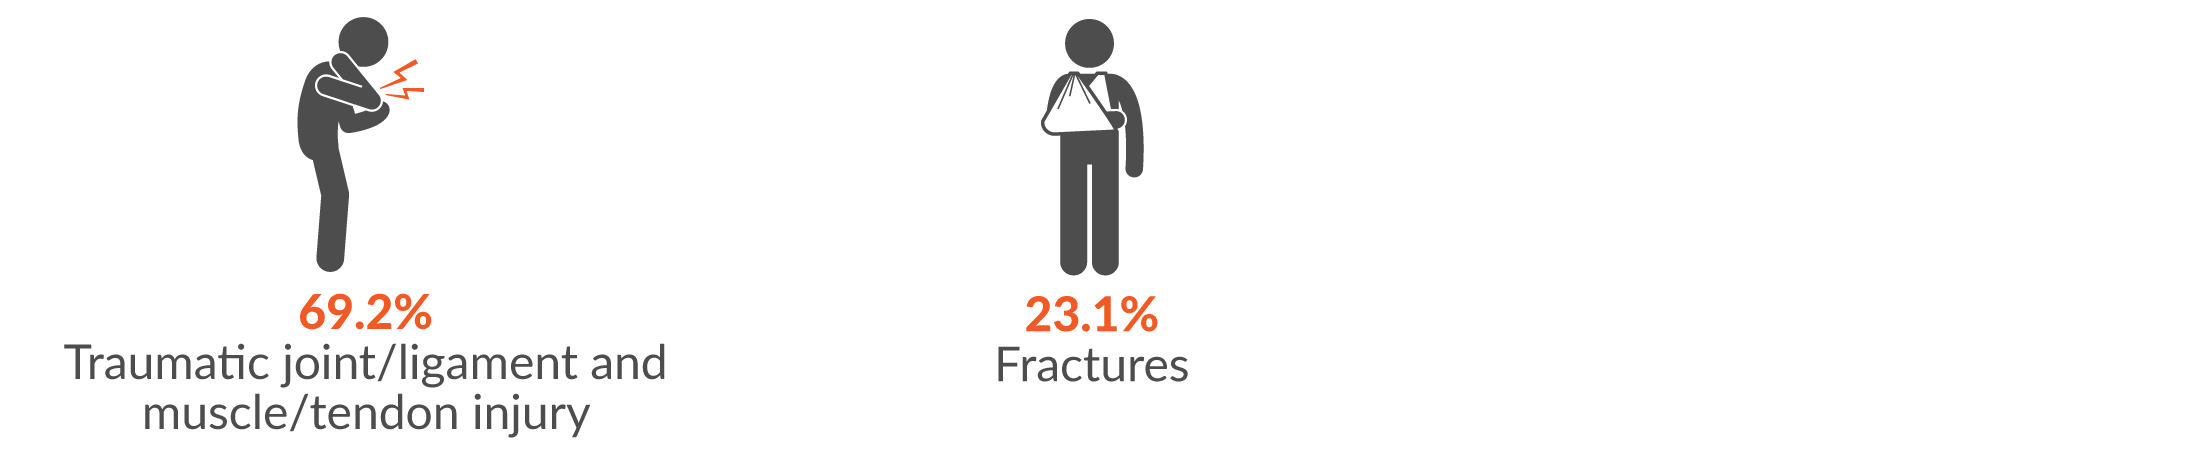 69.2% traumatic joint/ligament and muscle/tendon injury and 23.1% fractures.